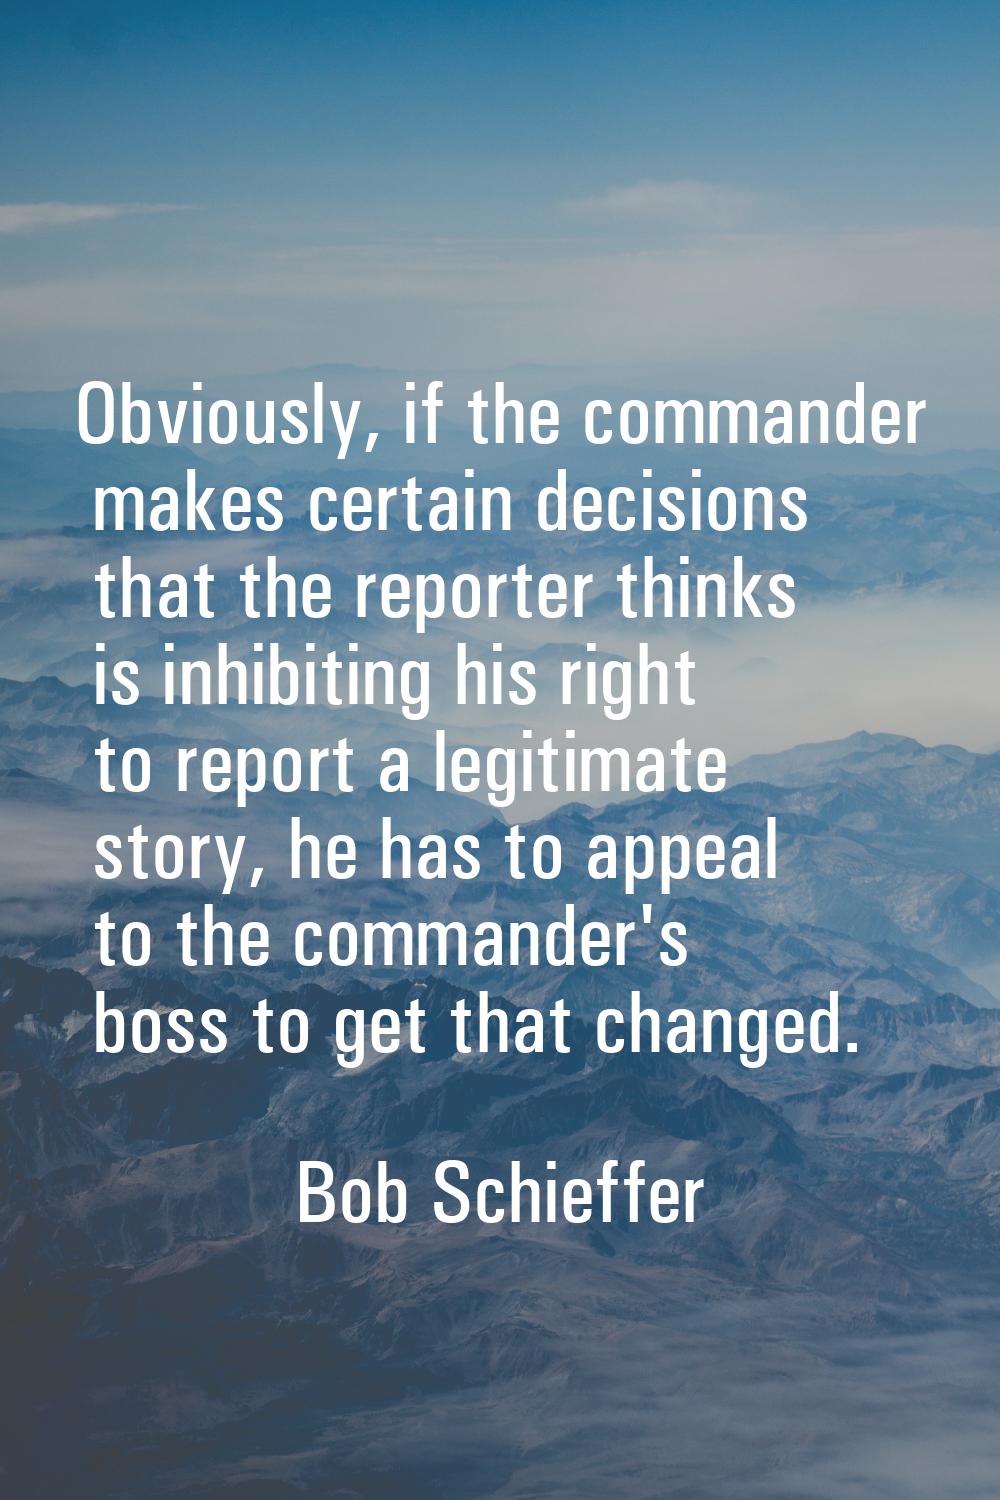 Obviously, if the commander makes certain decisions that the reporter thinks is inhibiting his righ